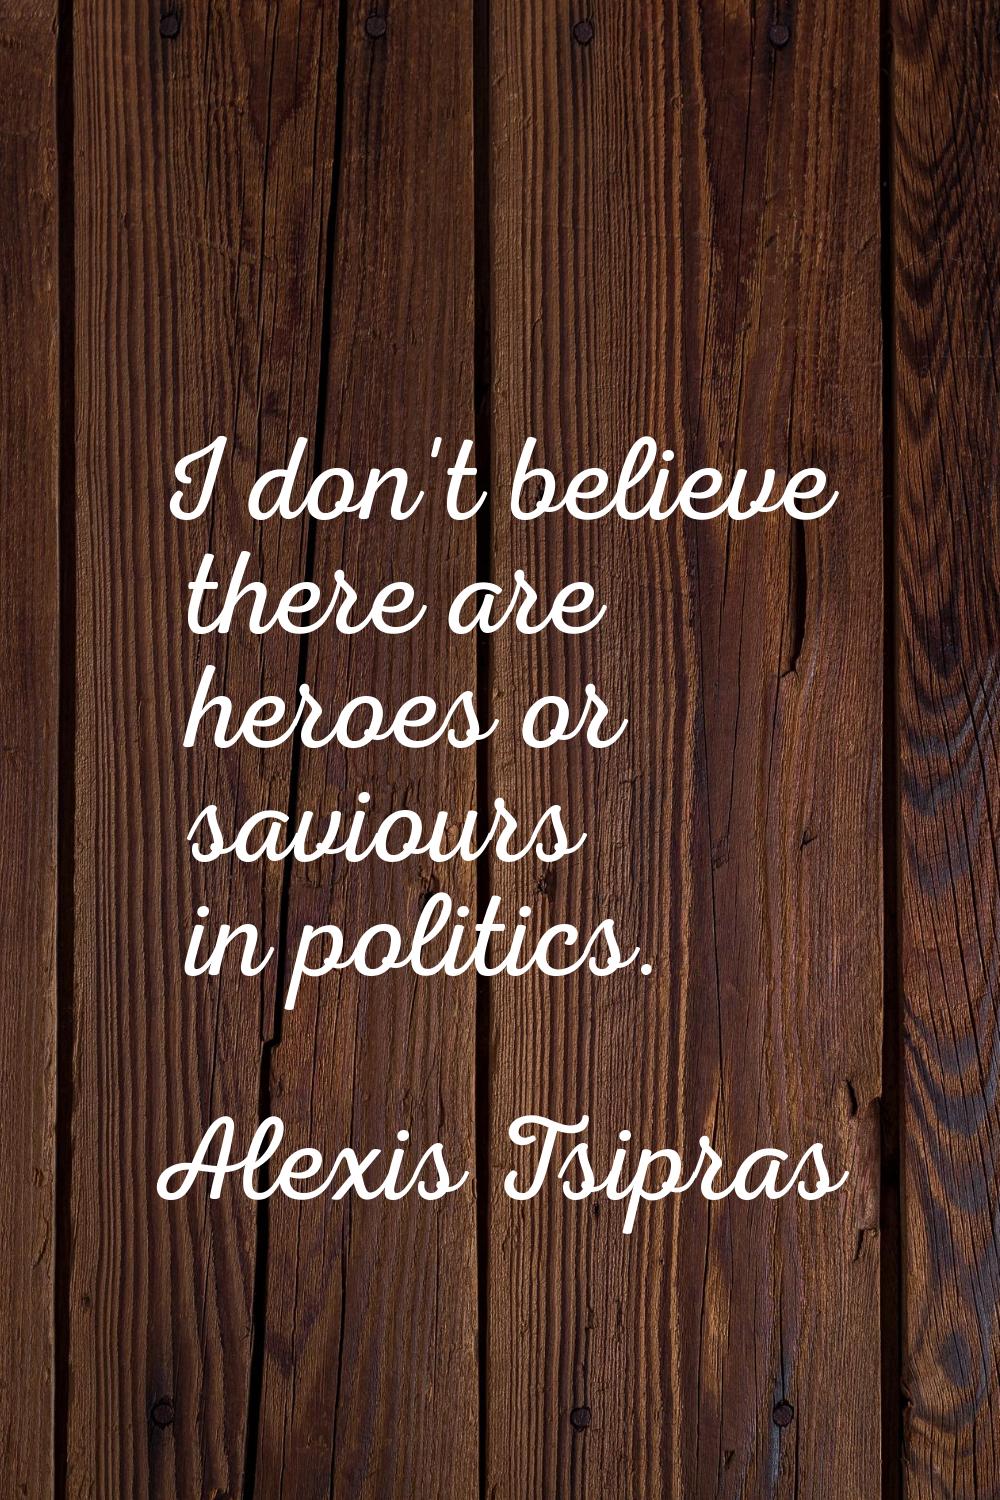 I don't believe there are heroes or saviours in politics.